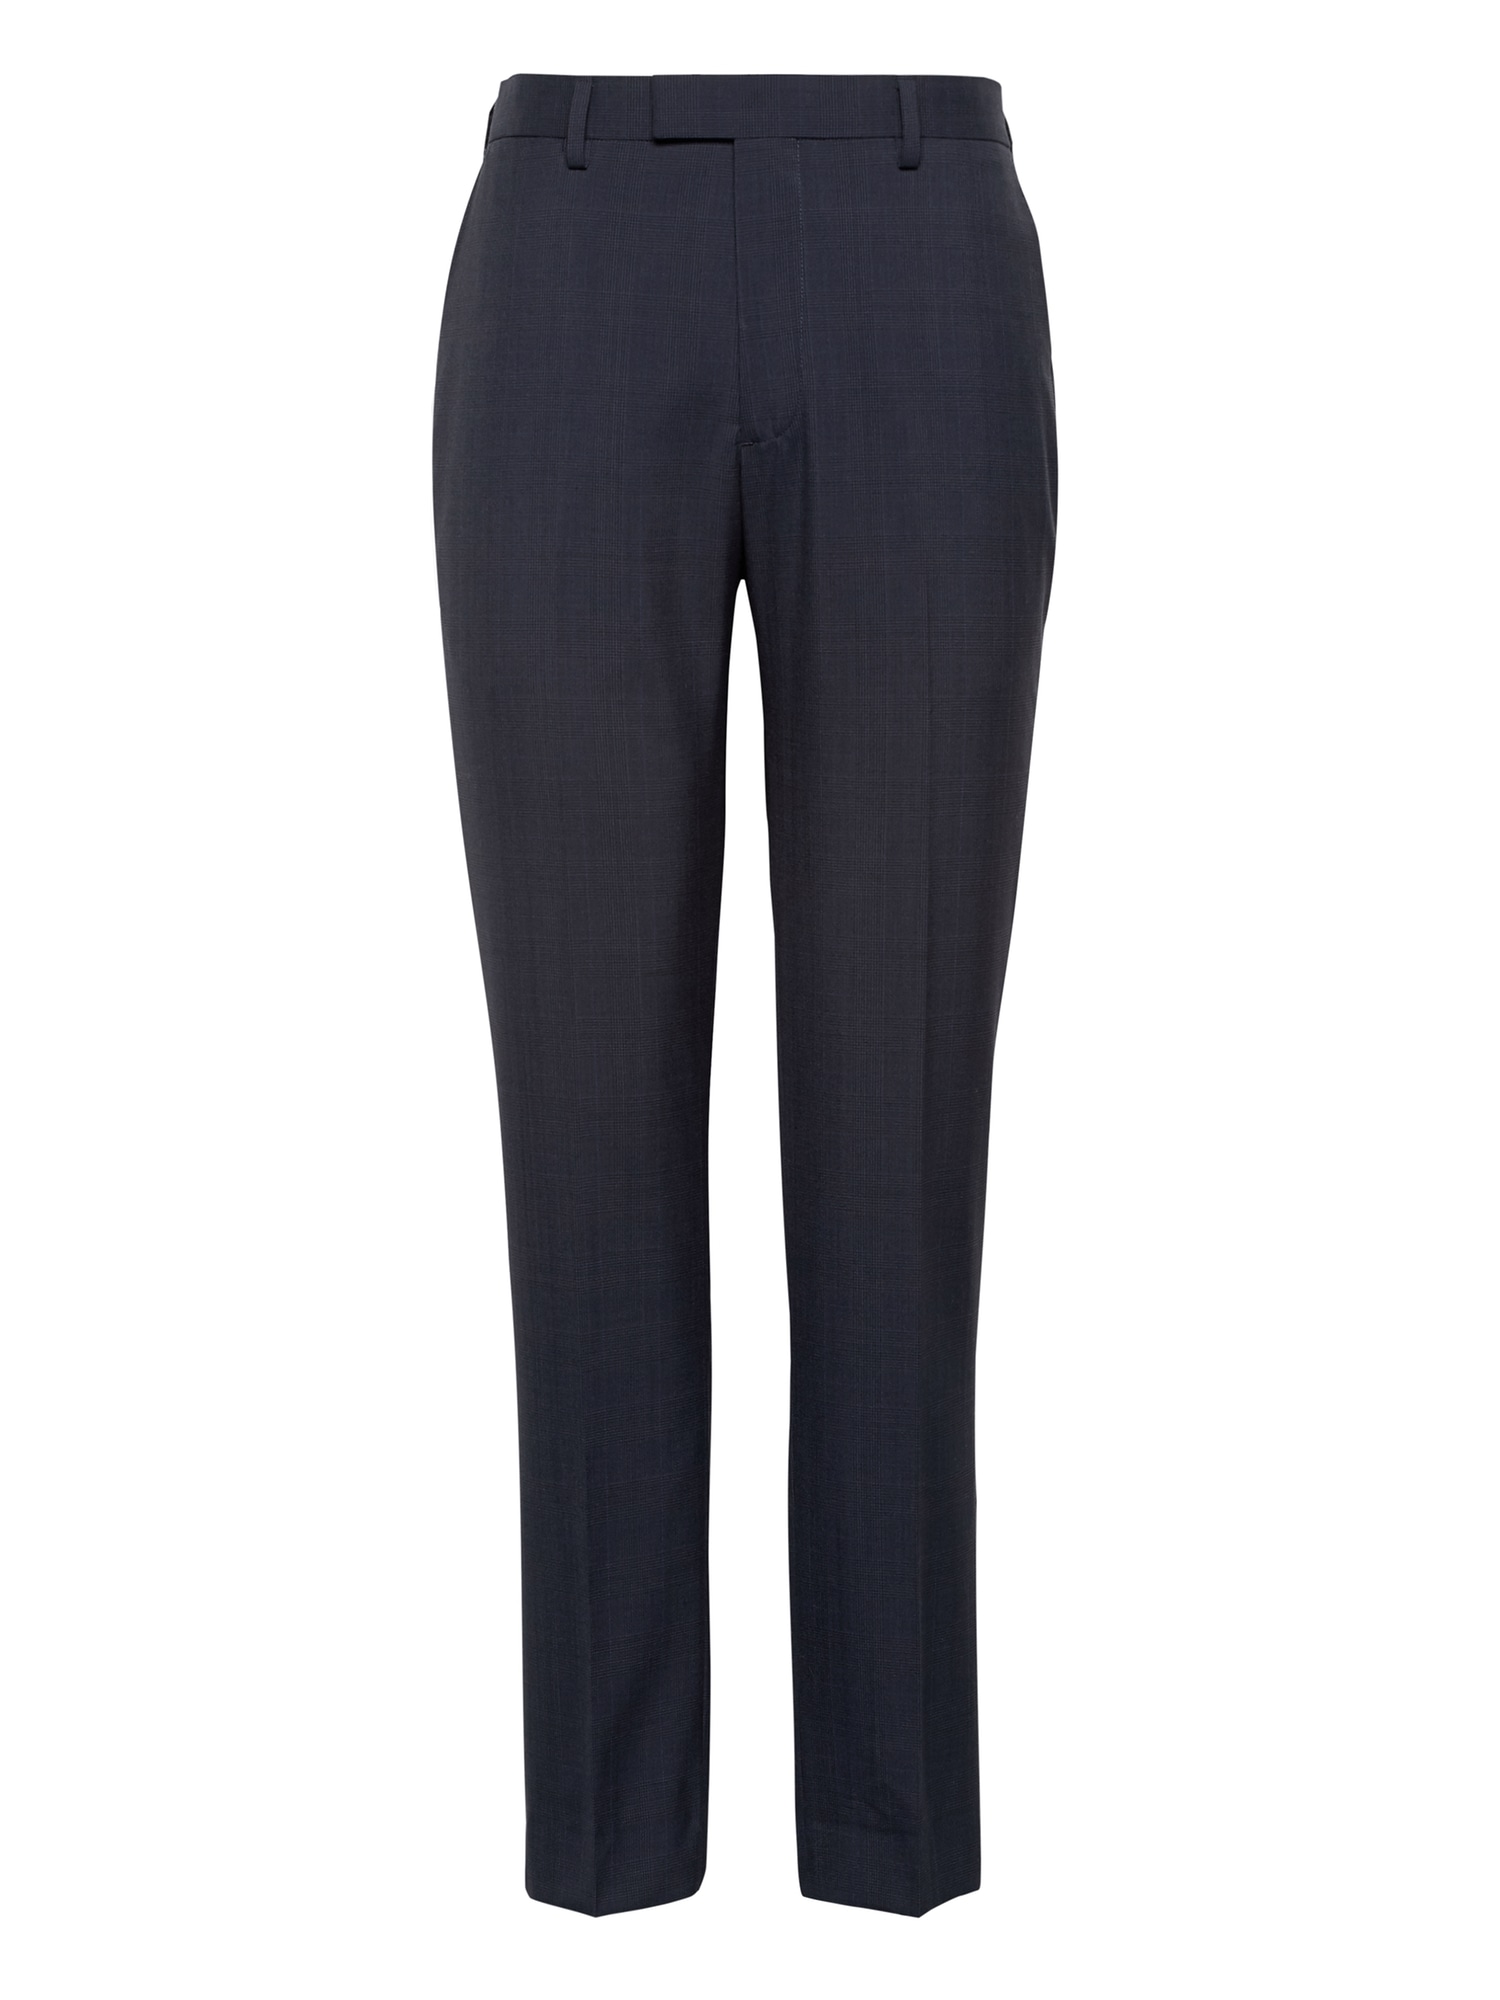 Athletic Tapered Smart-Weight Performance Suit Pant